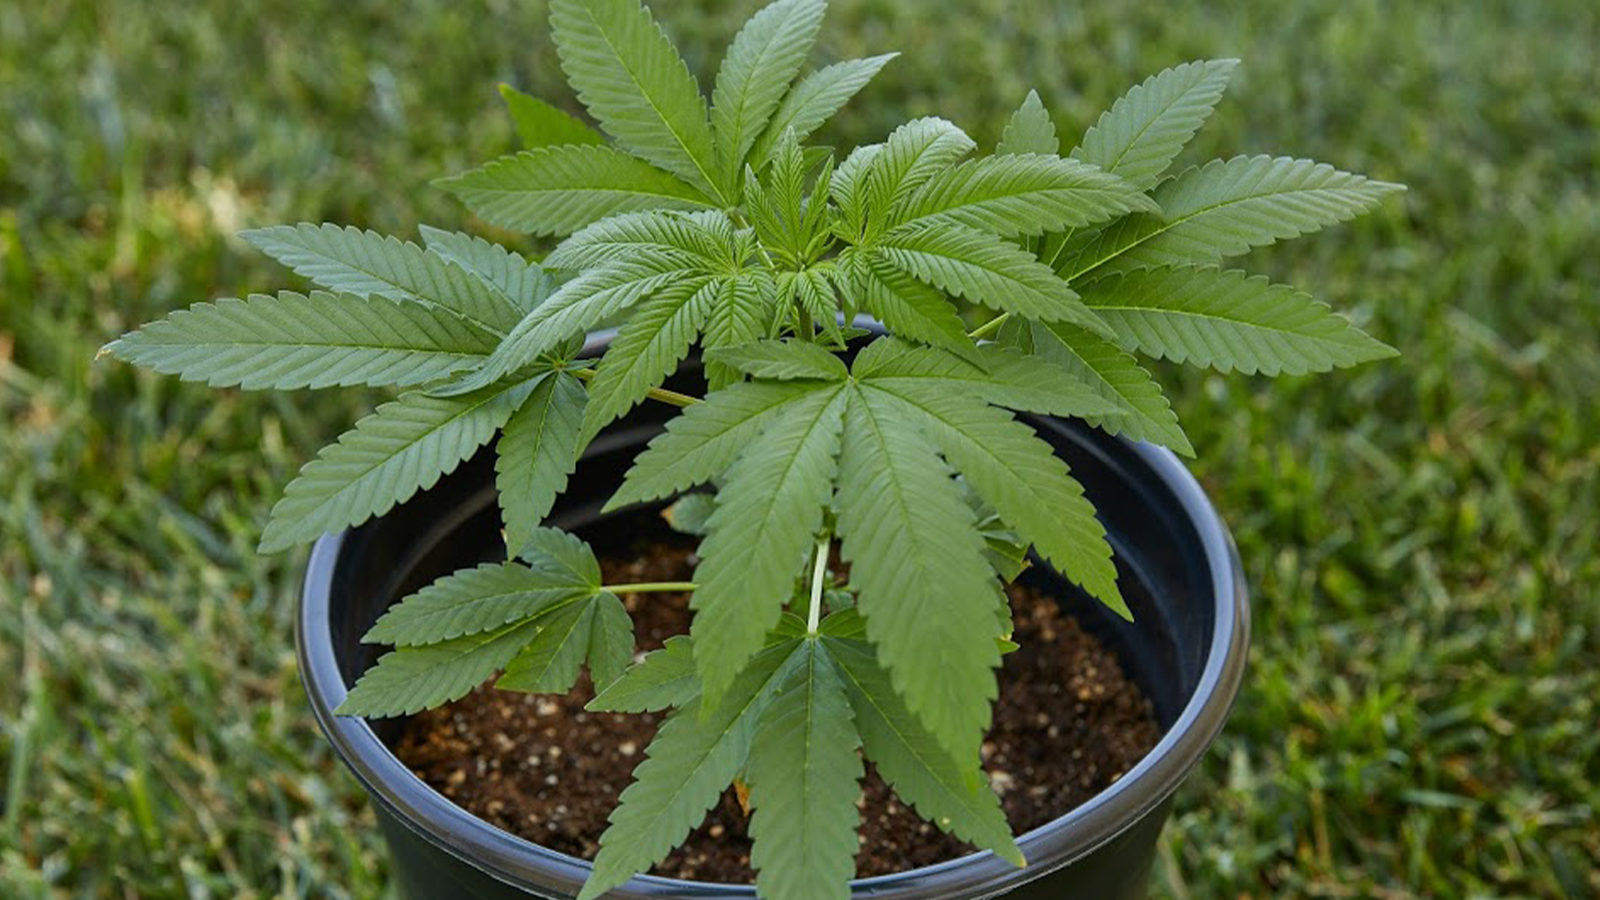 HOW TO WATER YOUR CANNABIS PLANTS